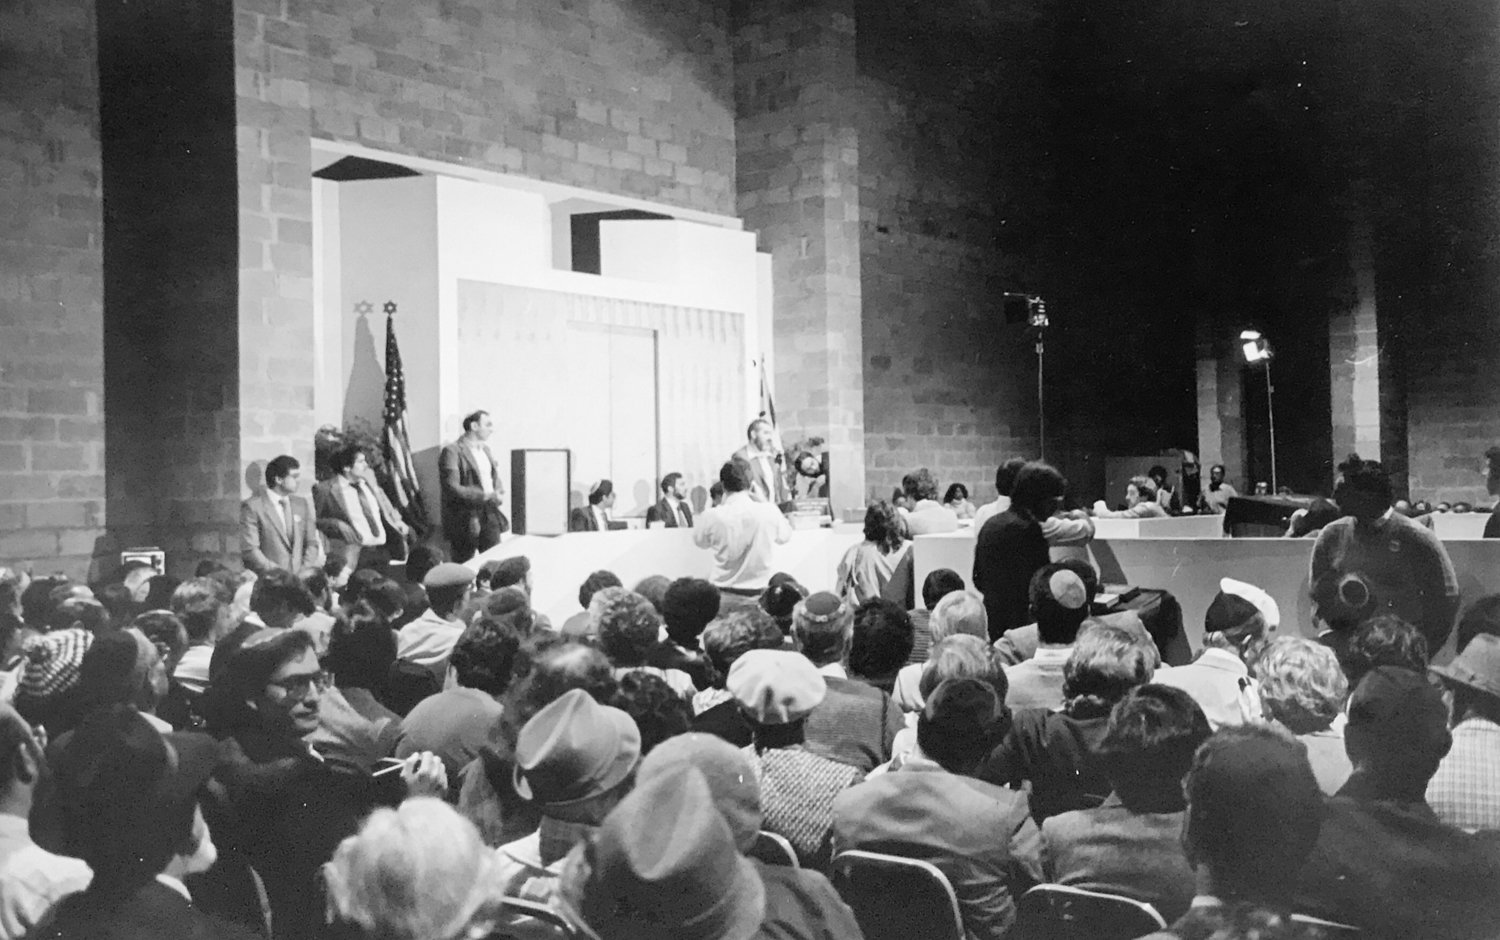 In 1984, more than 800 people filled the Hebrew Institute of Riverdale on Henry Hudson Parkway to hear a debate between firebrand Rabbi Meir Kahane and then-Harvard law professor Alan Dershowitz. Kahane believed Israel should exist only for Jews, while Dershowitz pushed for a union between Judaism and democracy in the country.